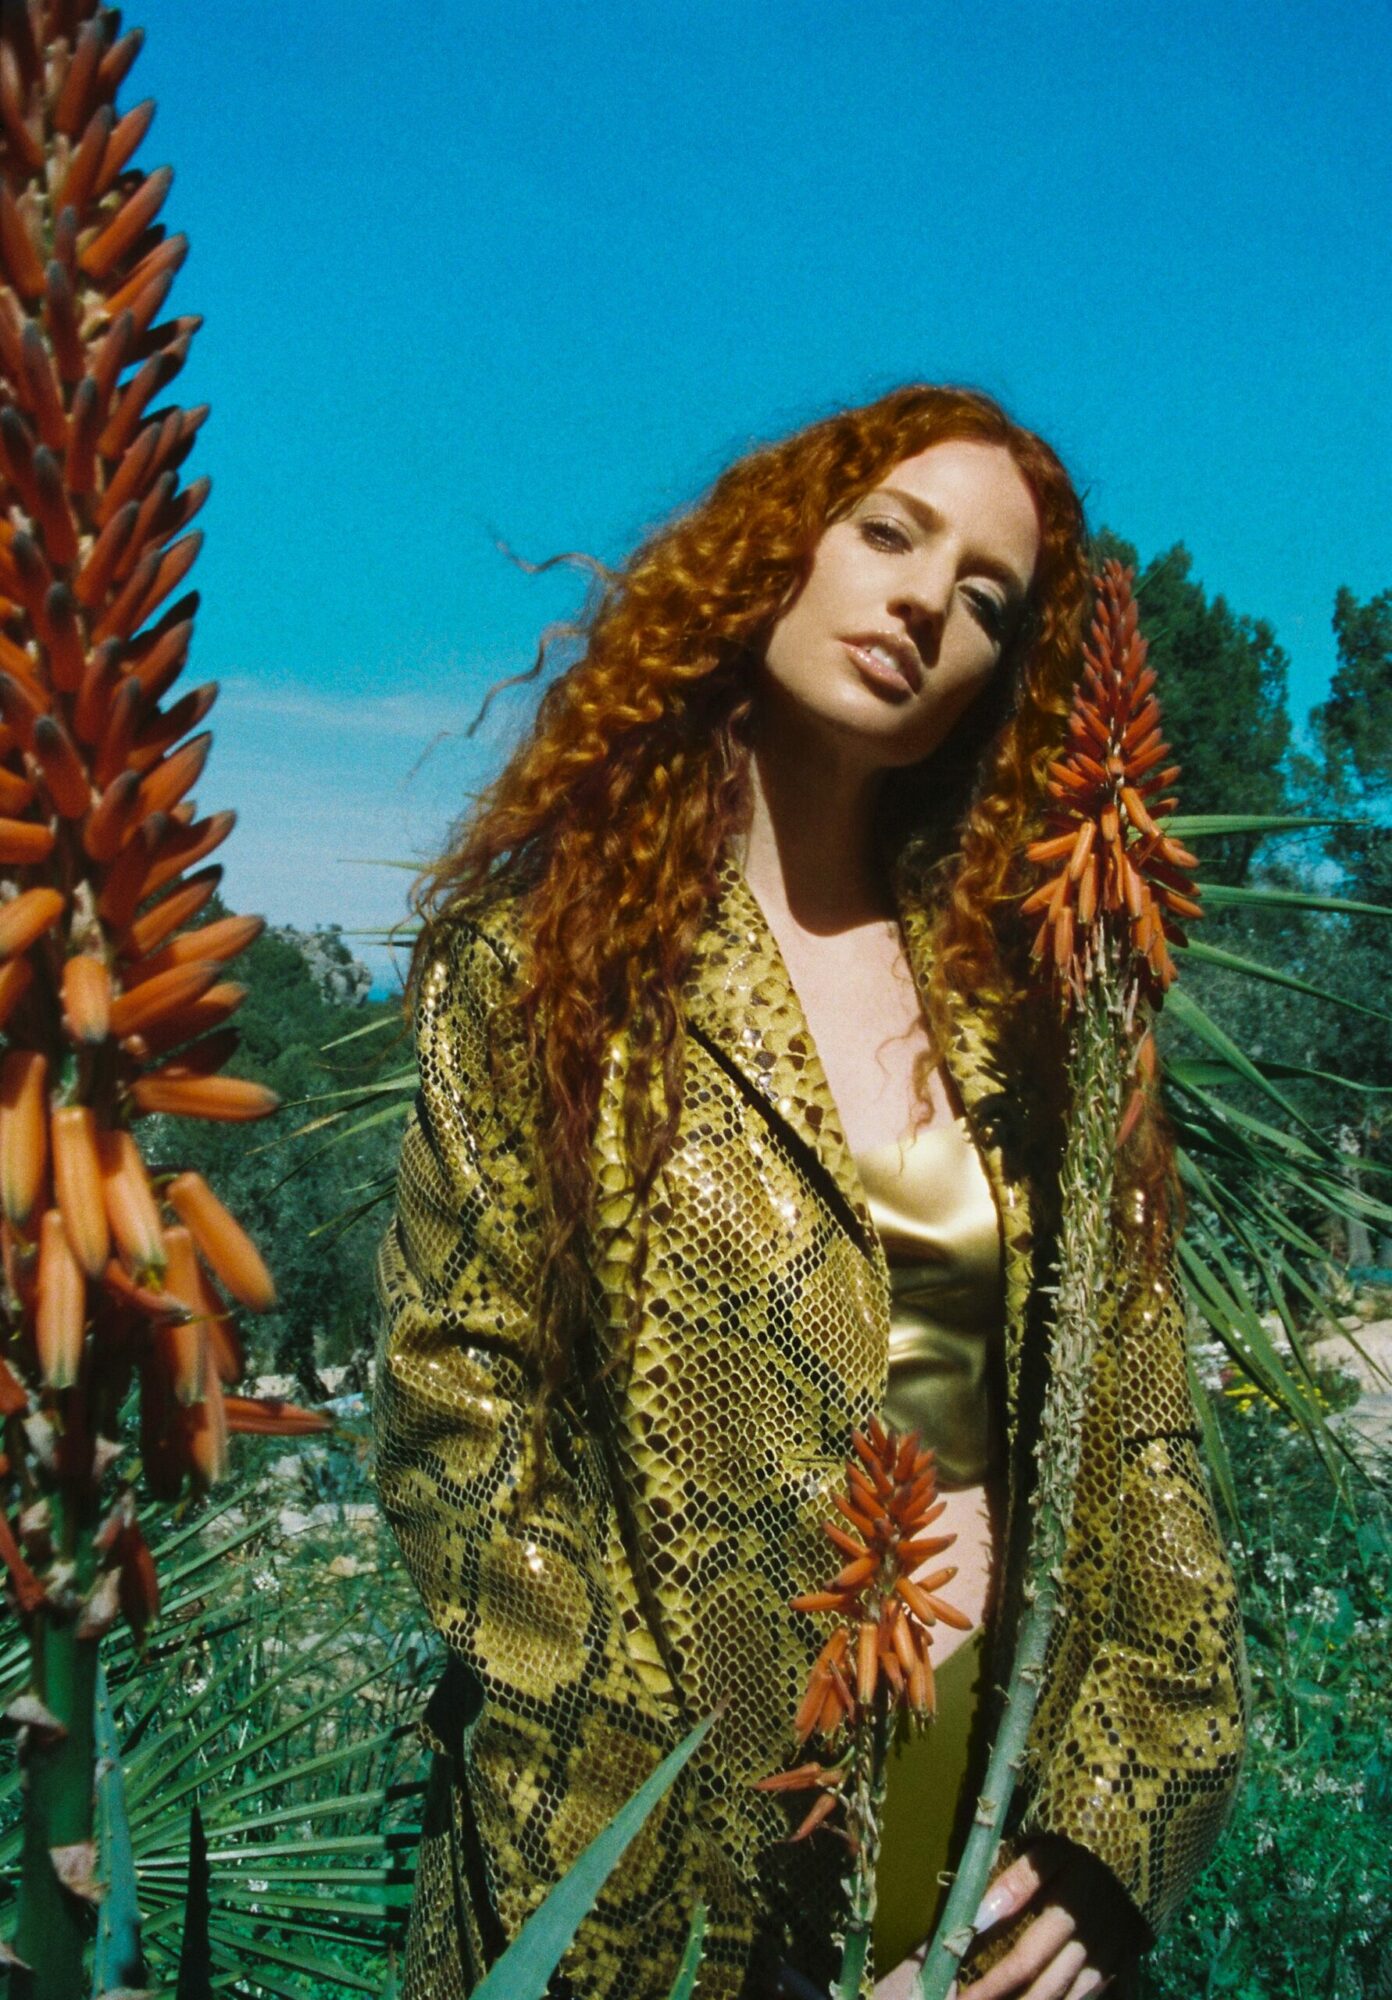 Jess Glynne at Scarborough Open Air Theatre, Scarborough